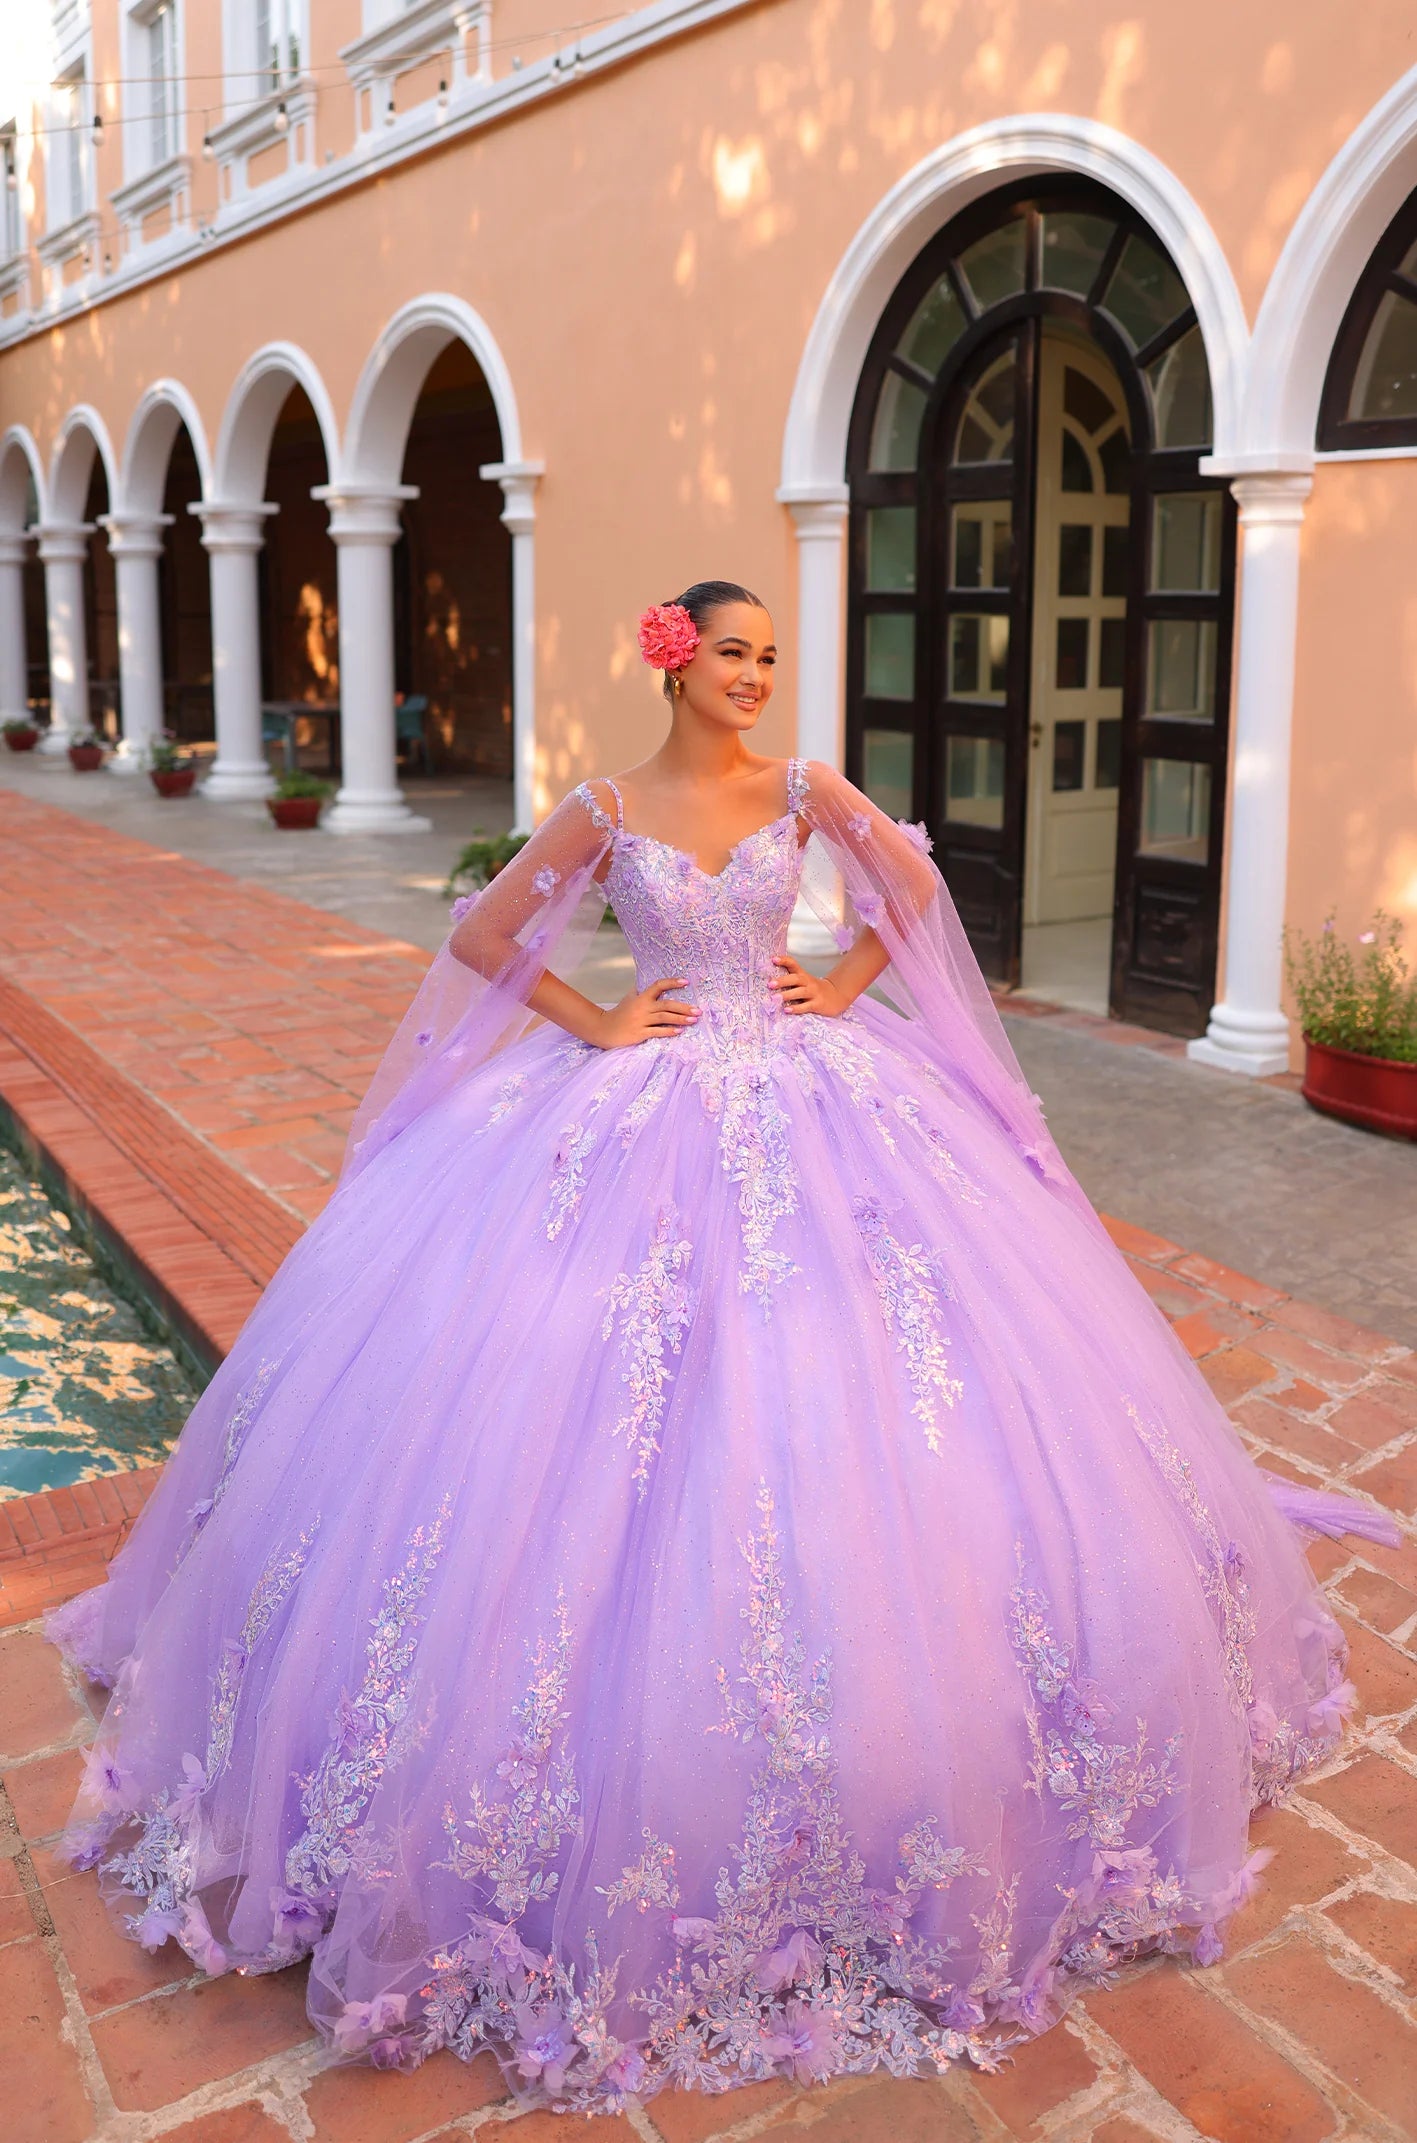 quinceañera Dresses the celebration of a girl's 15th birthday marking her passage from girlhood to womanhood; the term is also used for the celebrant herself. quinceanera Birthday Dresses